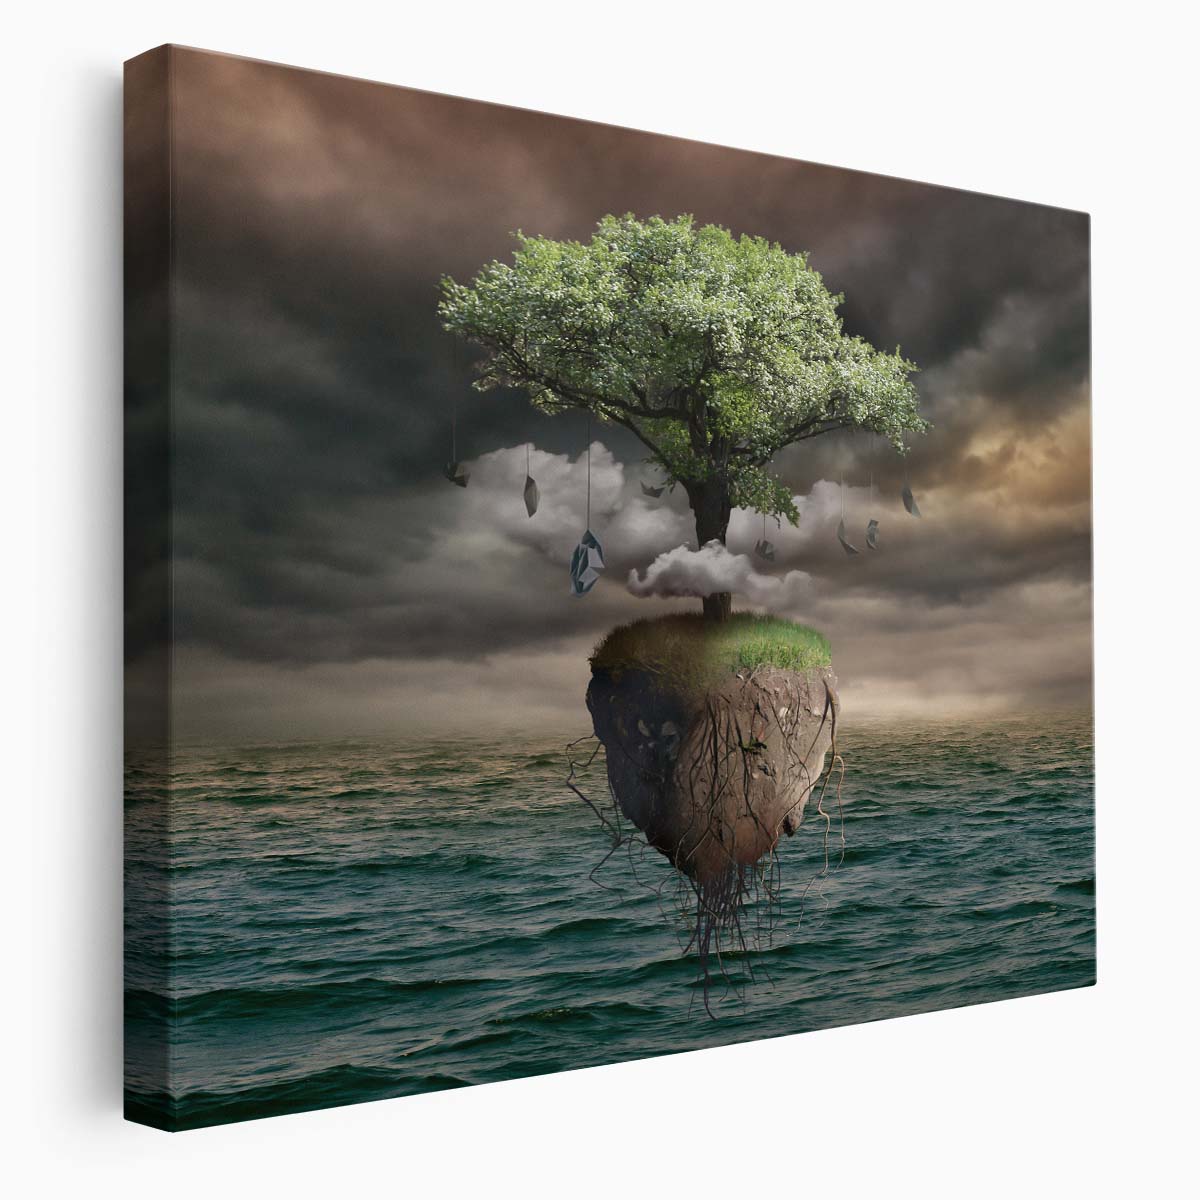 Surreal Autumn Island Dreamscape Tree Wall Art by Luxuriance Designs. Made in USA.